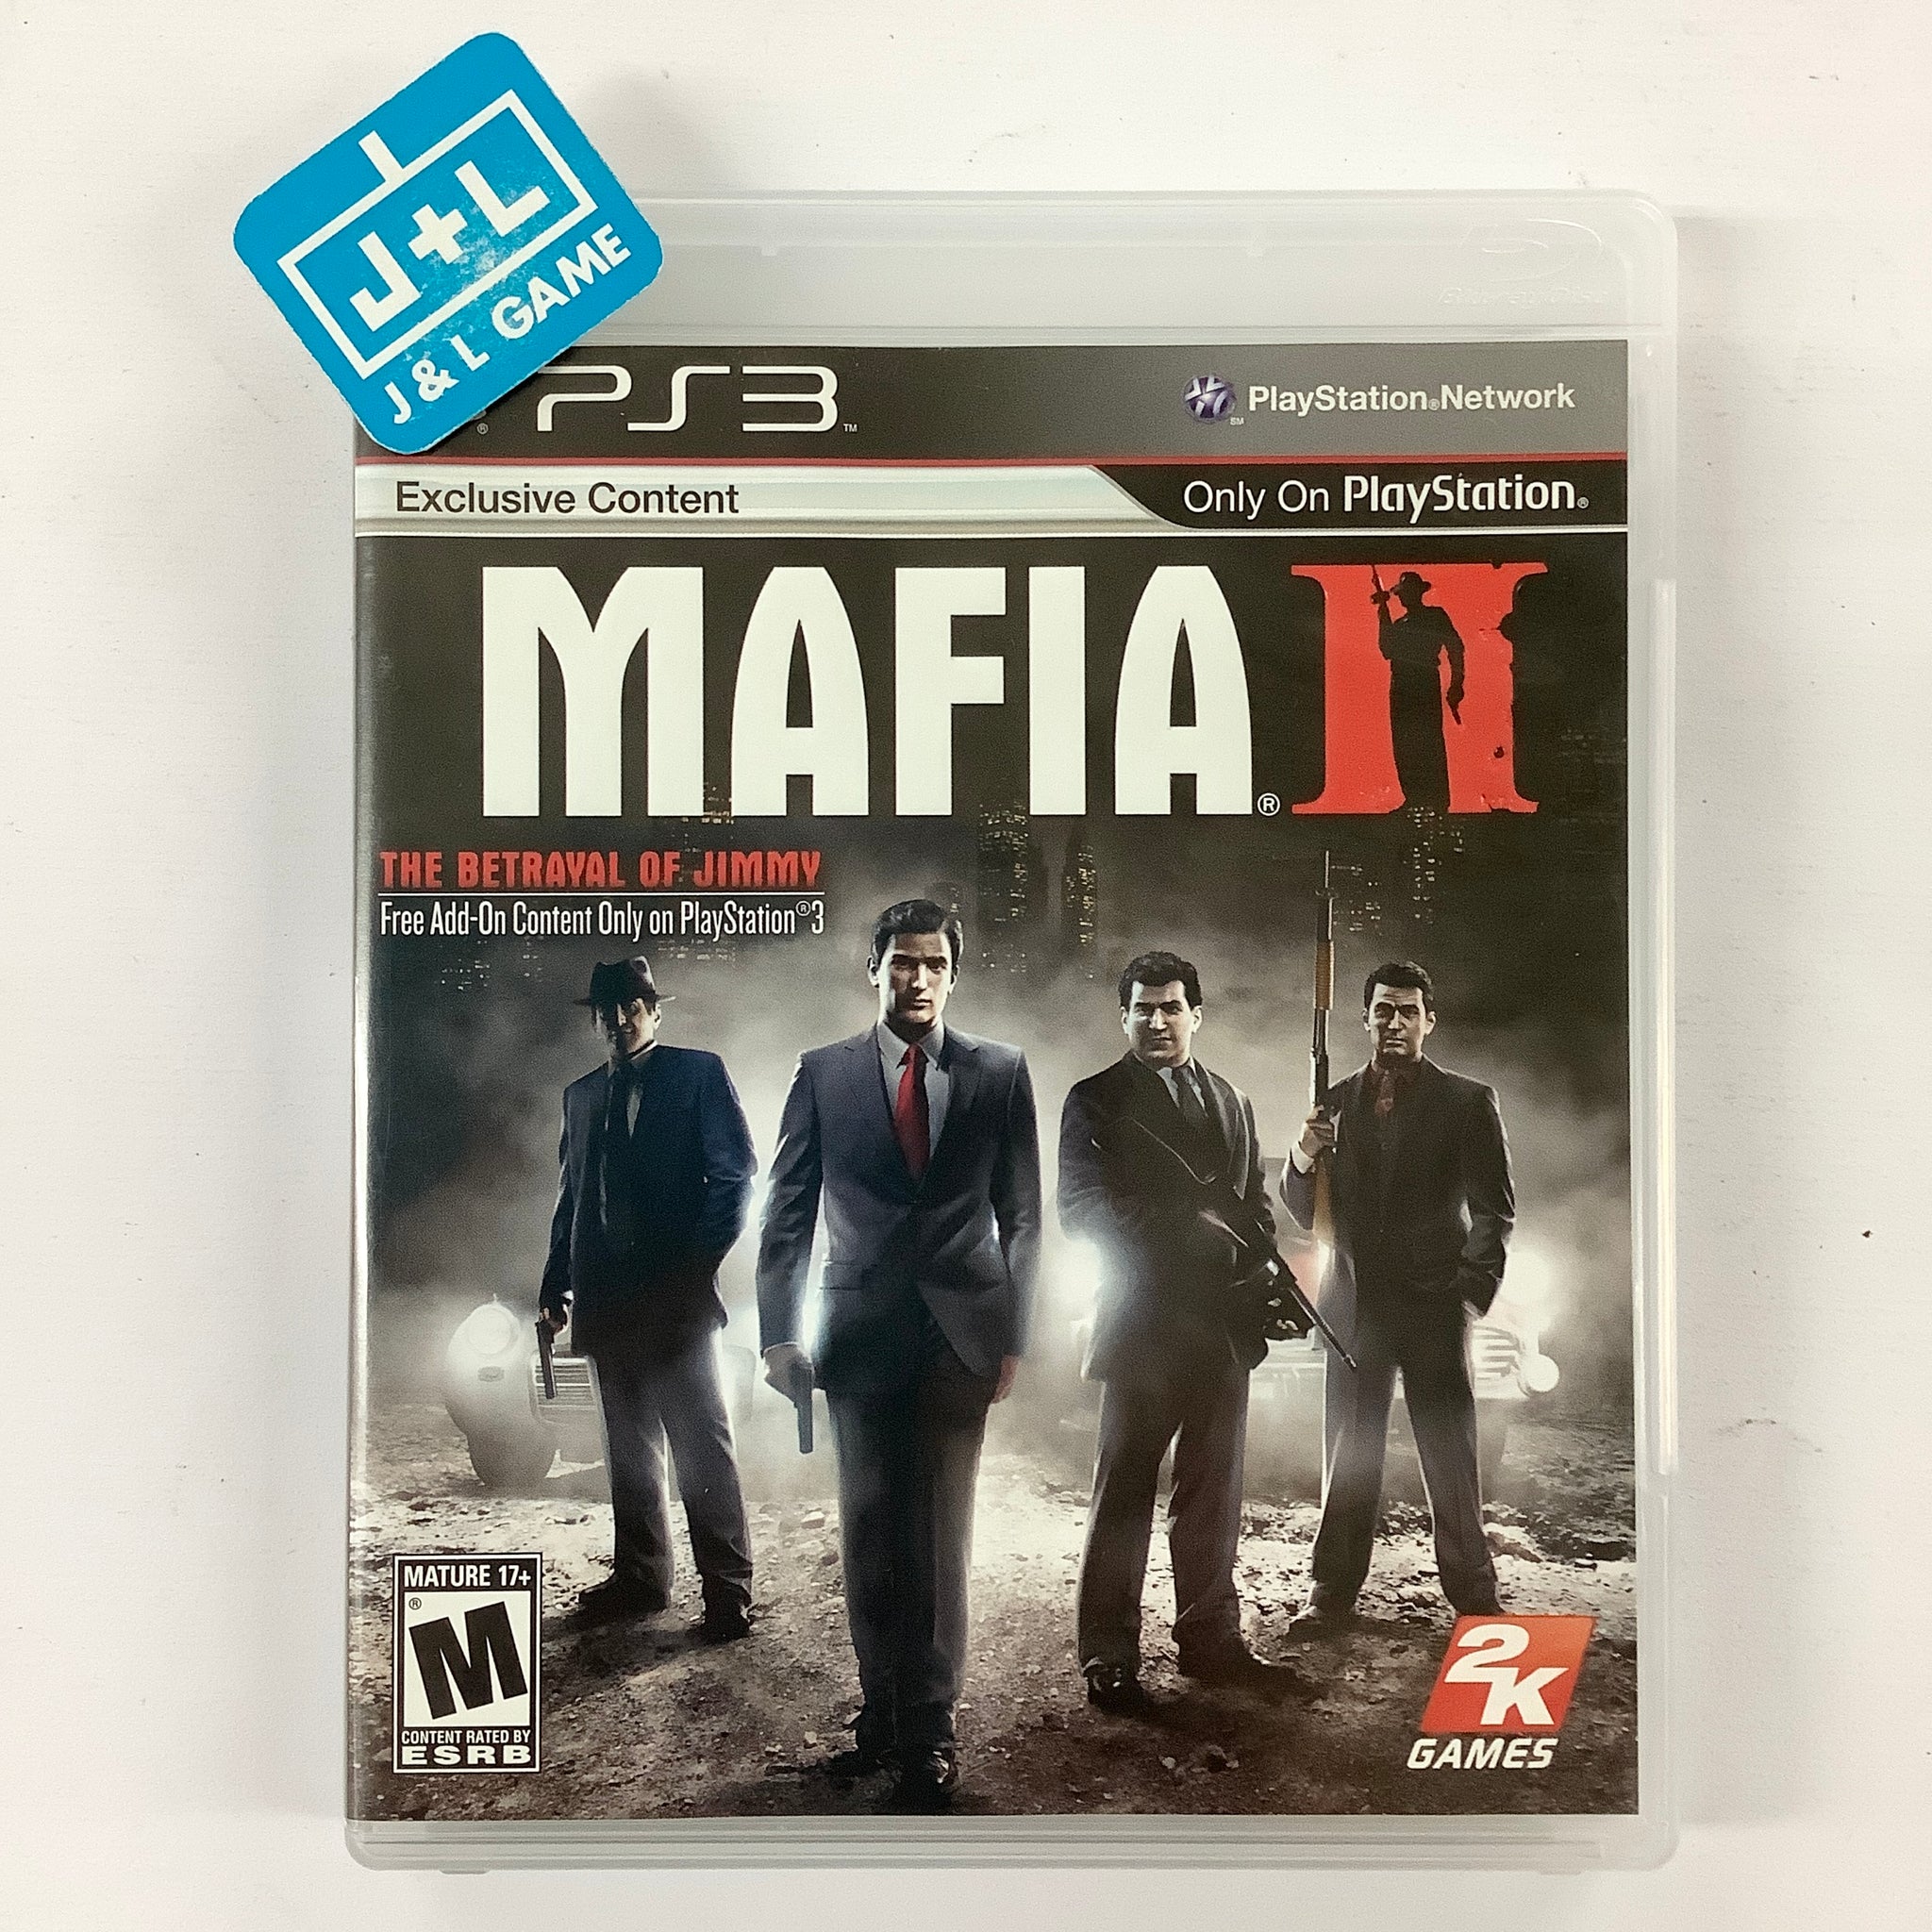 PLAYSTATION 3 PS3 VIDEO GAME MAFIA II COMPLETE W CASE MANUAL 2K GAMES